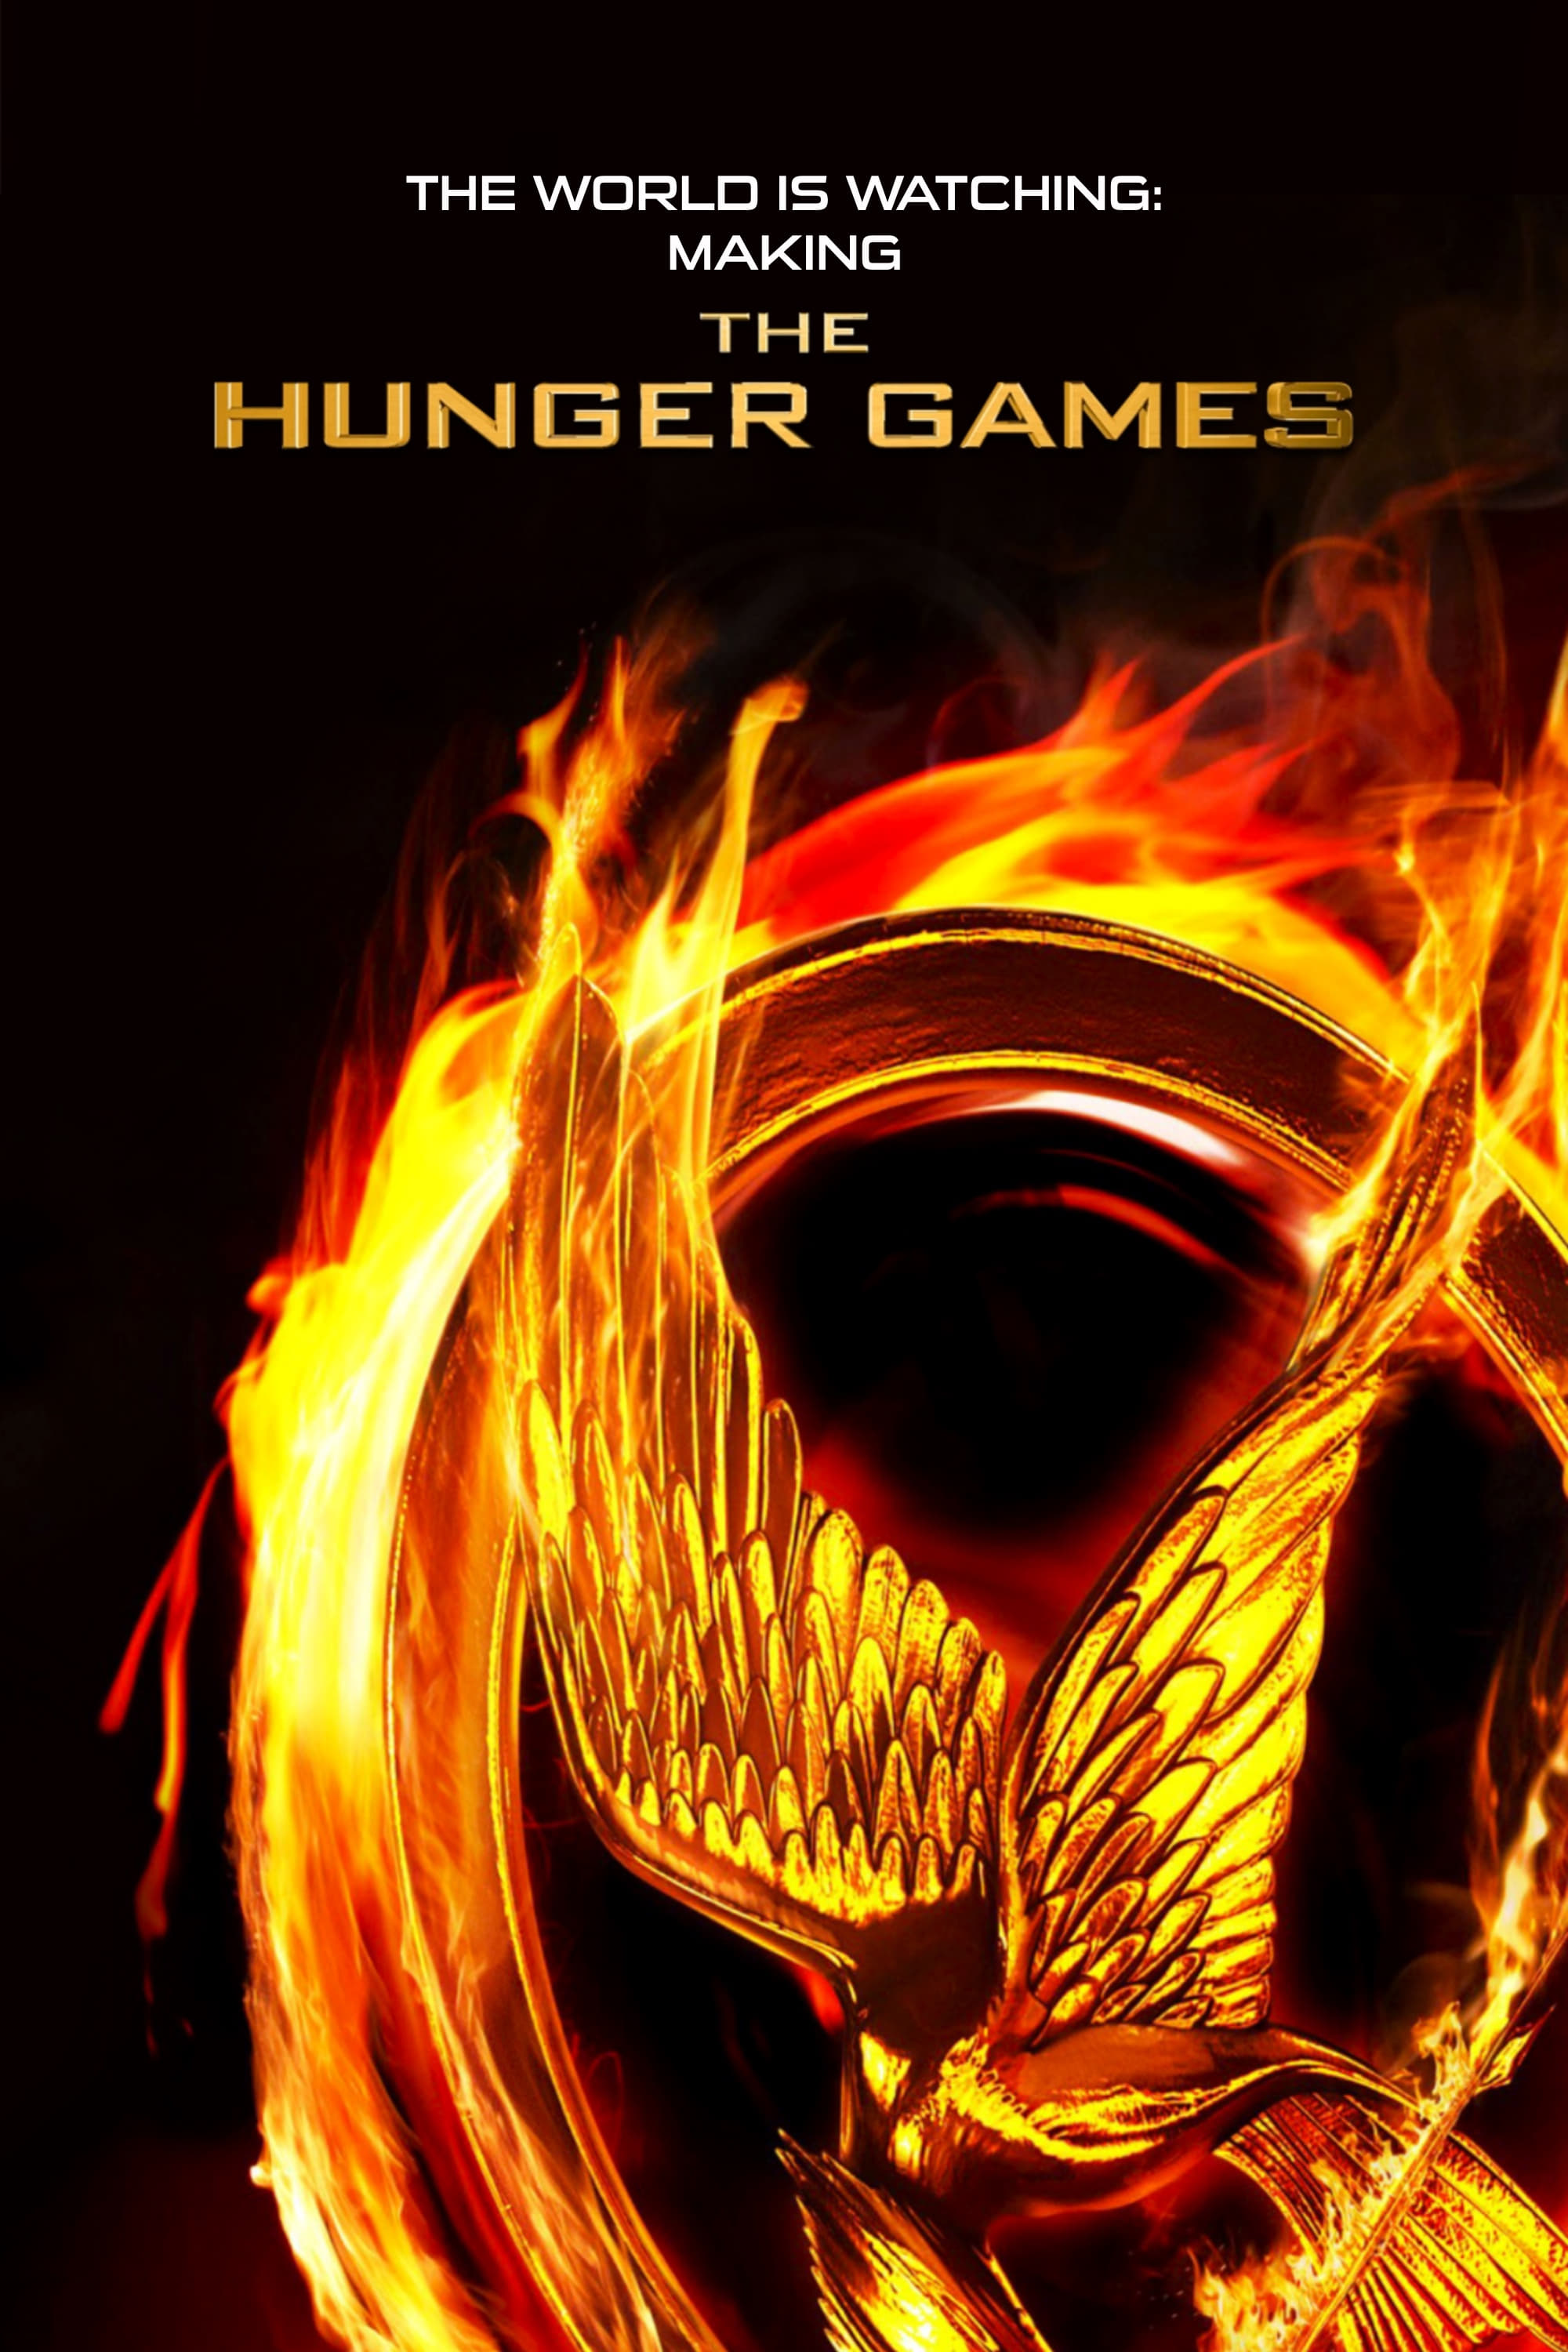 The World Is Watching: Making the Hunger Games (2012)